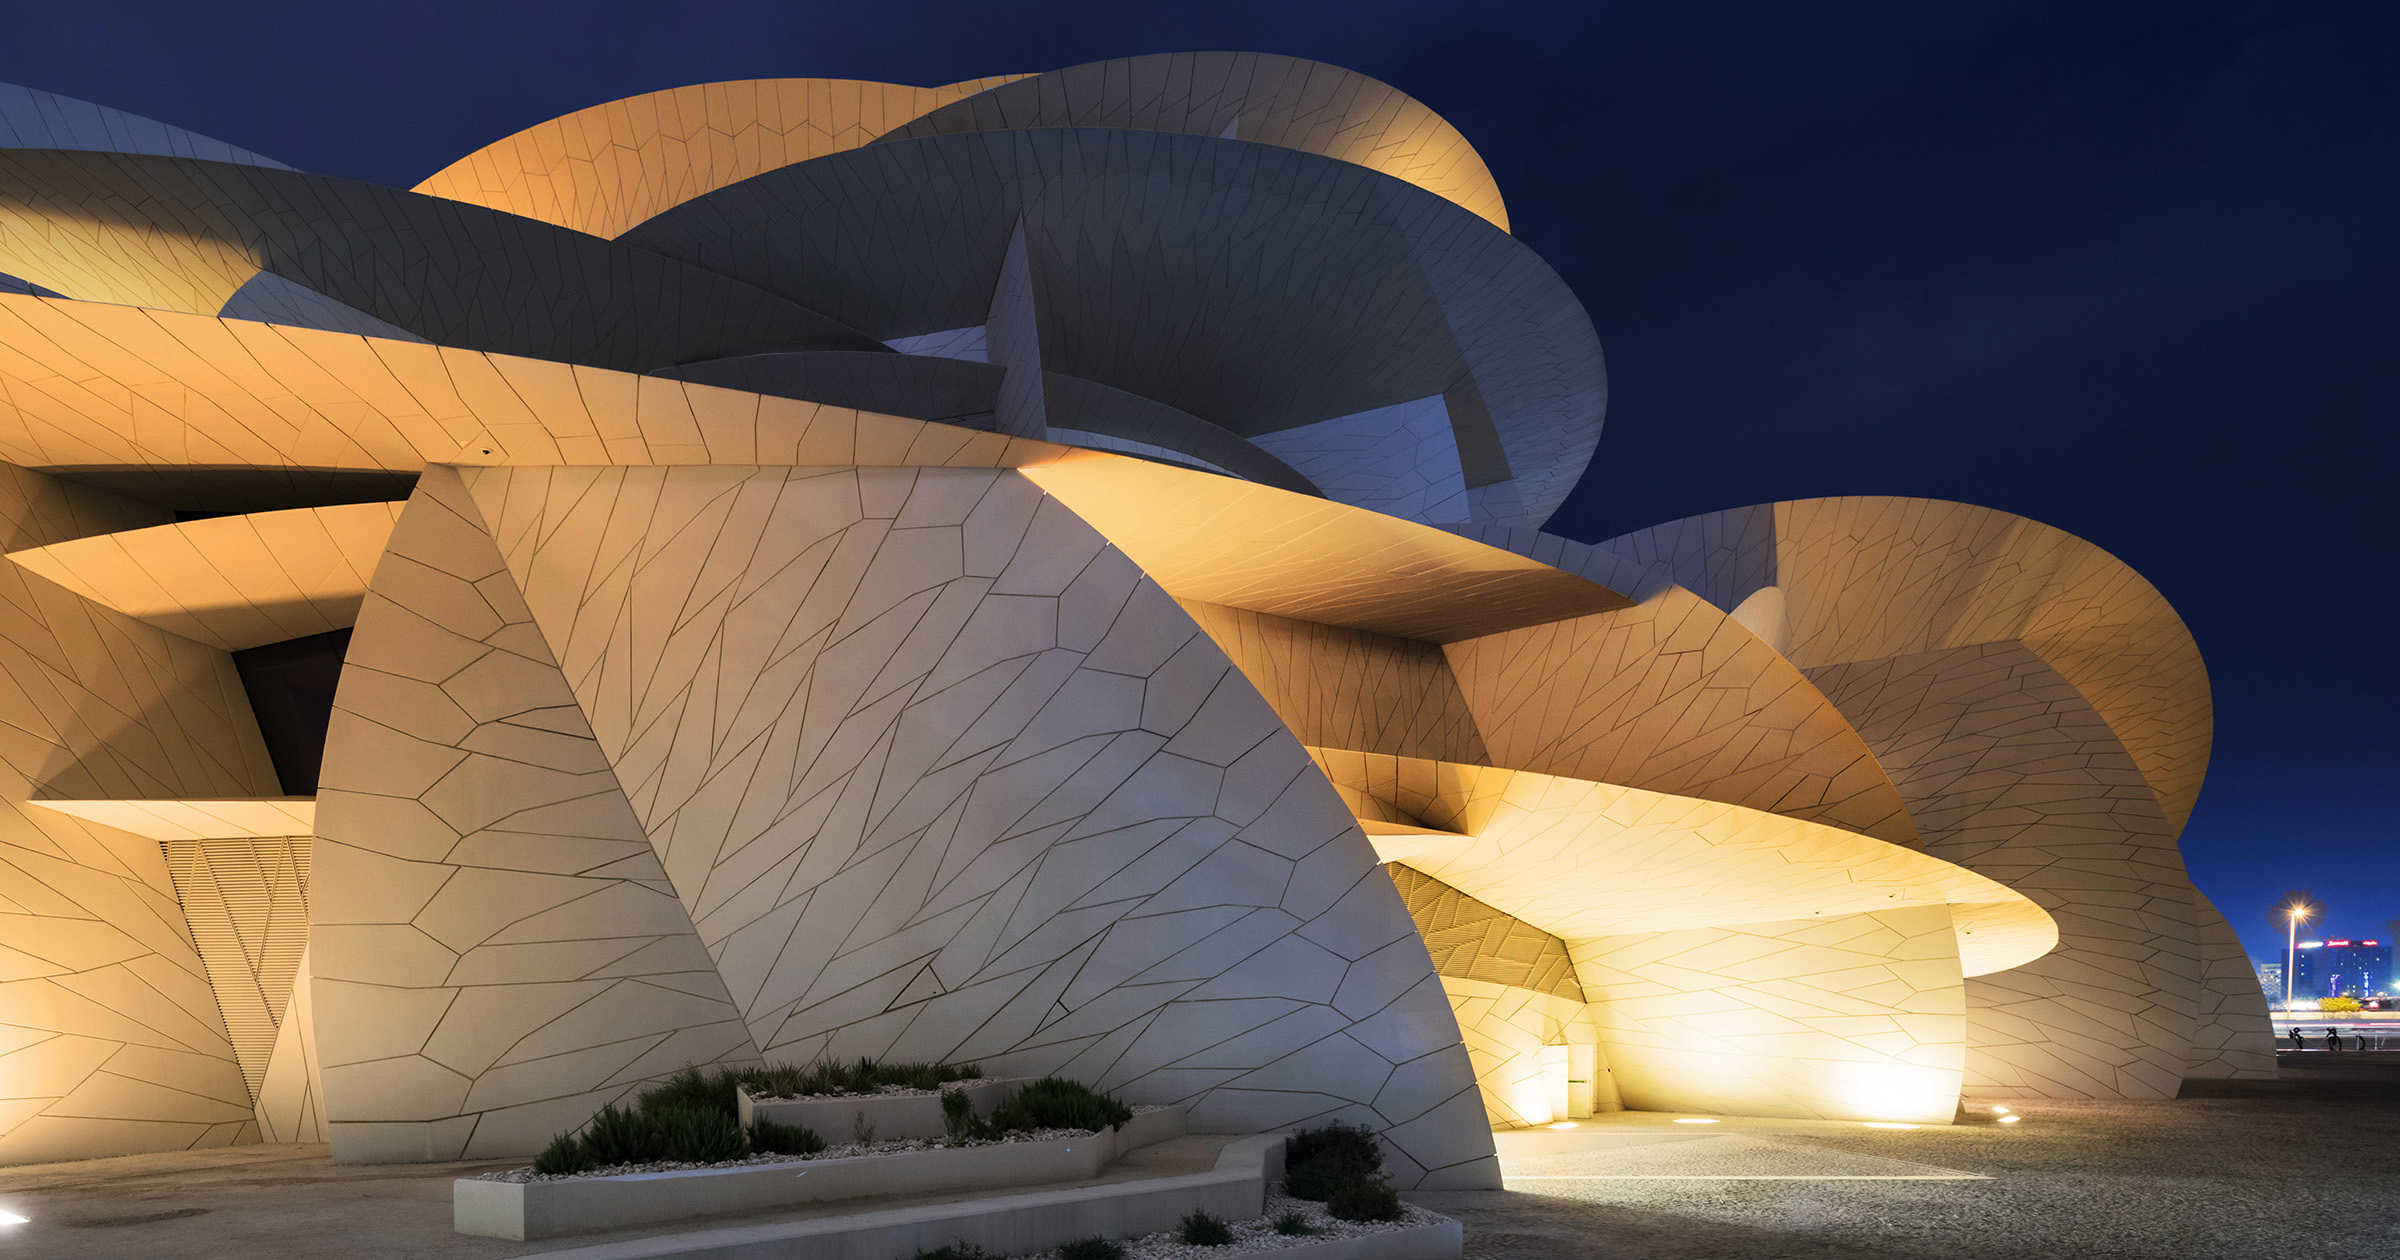 Presenting the World's Best New Cultural Architecture - Architizer Journal